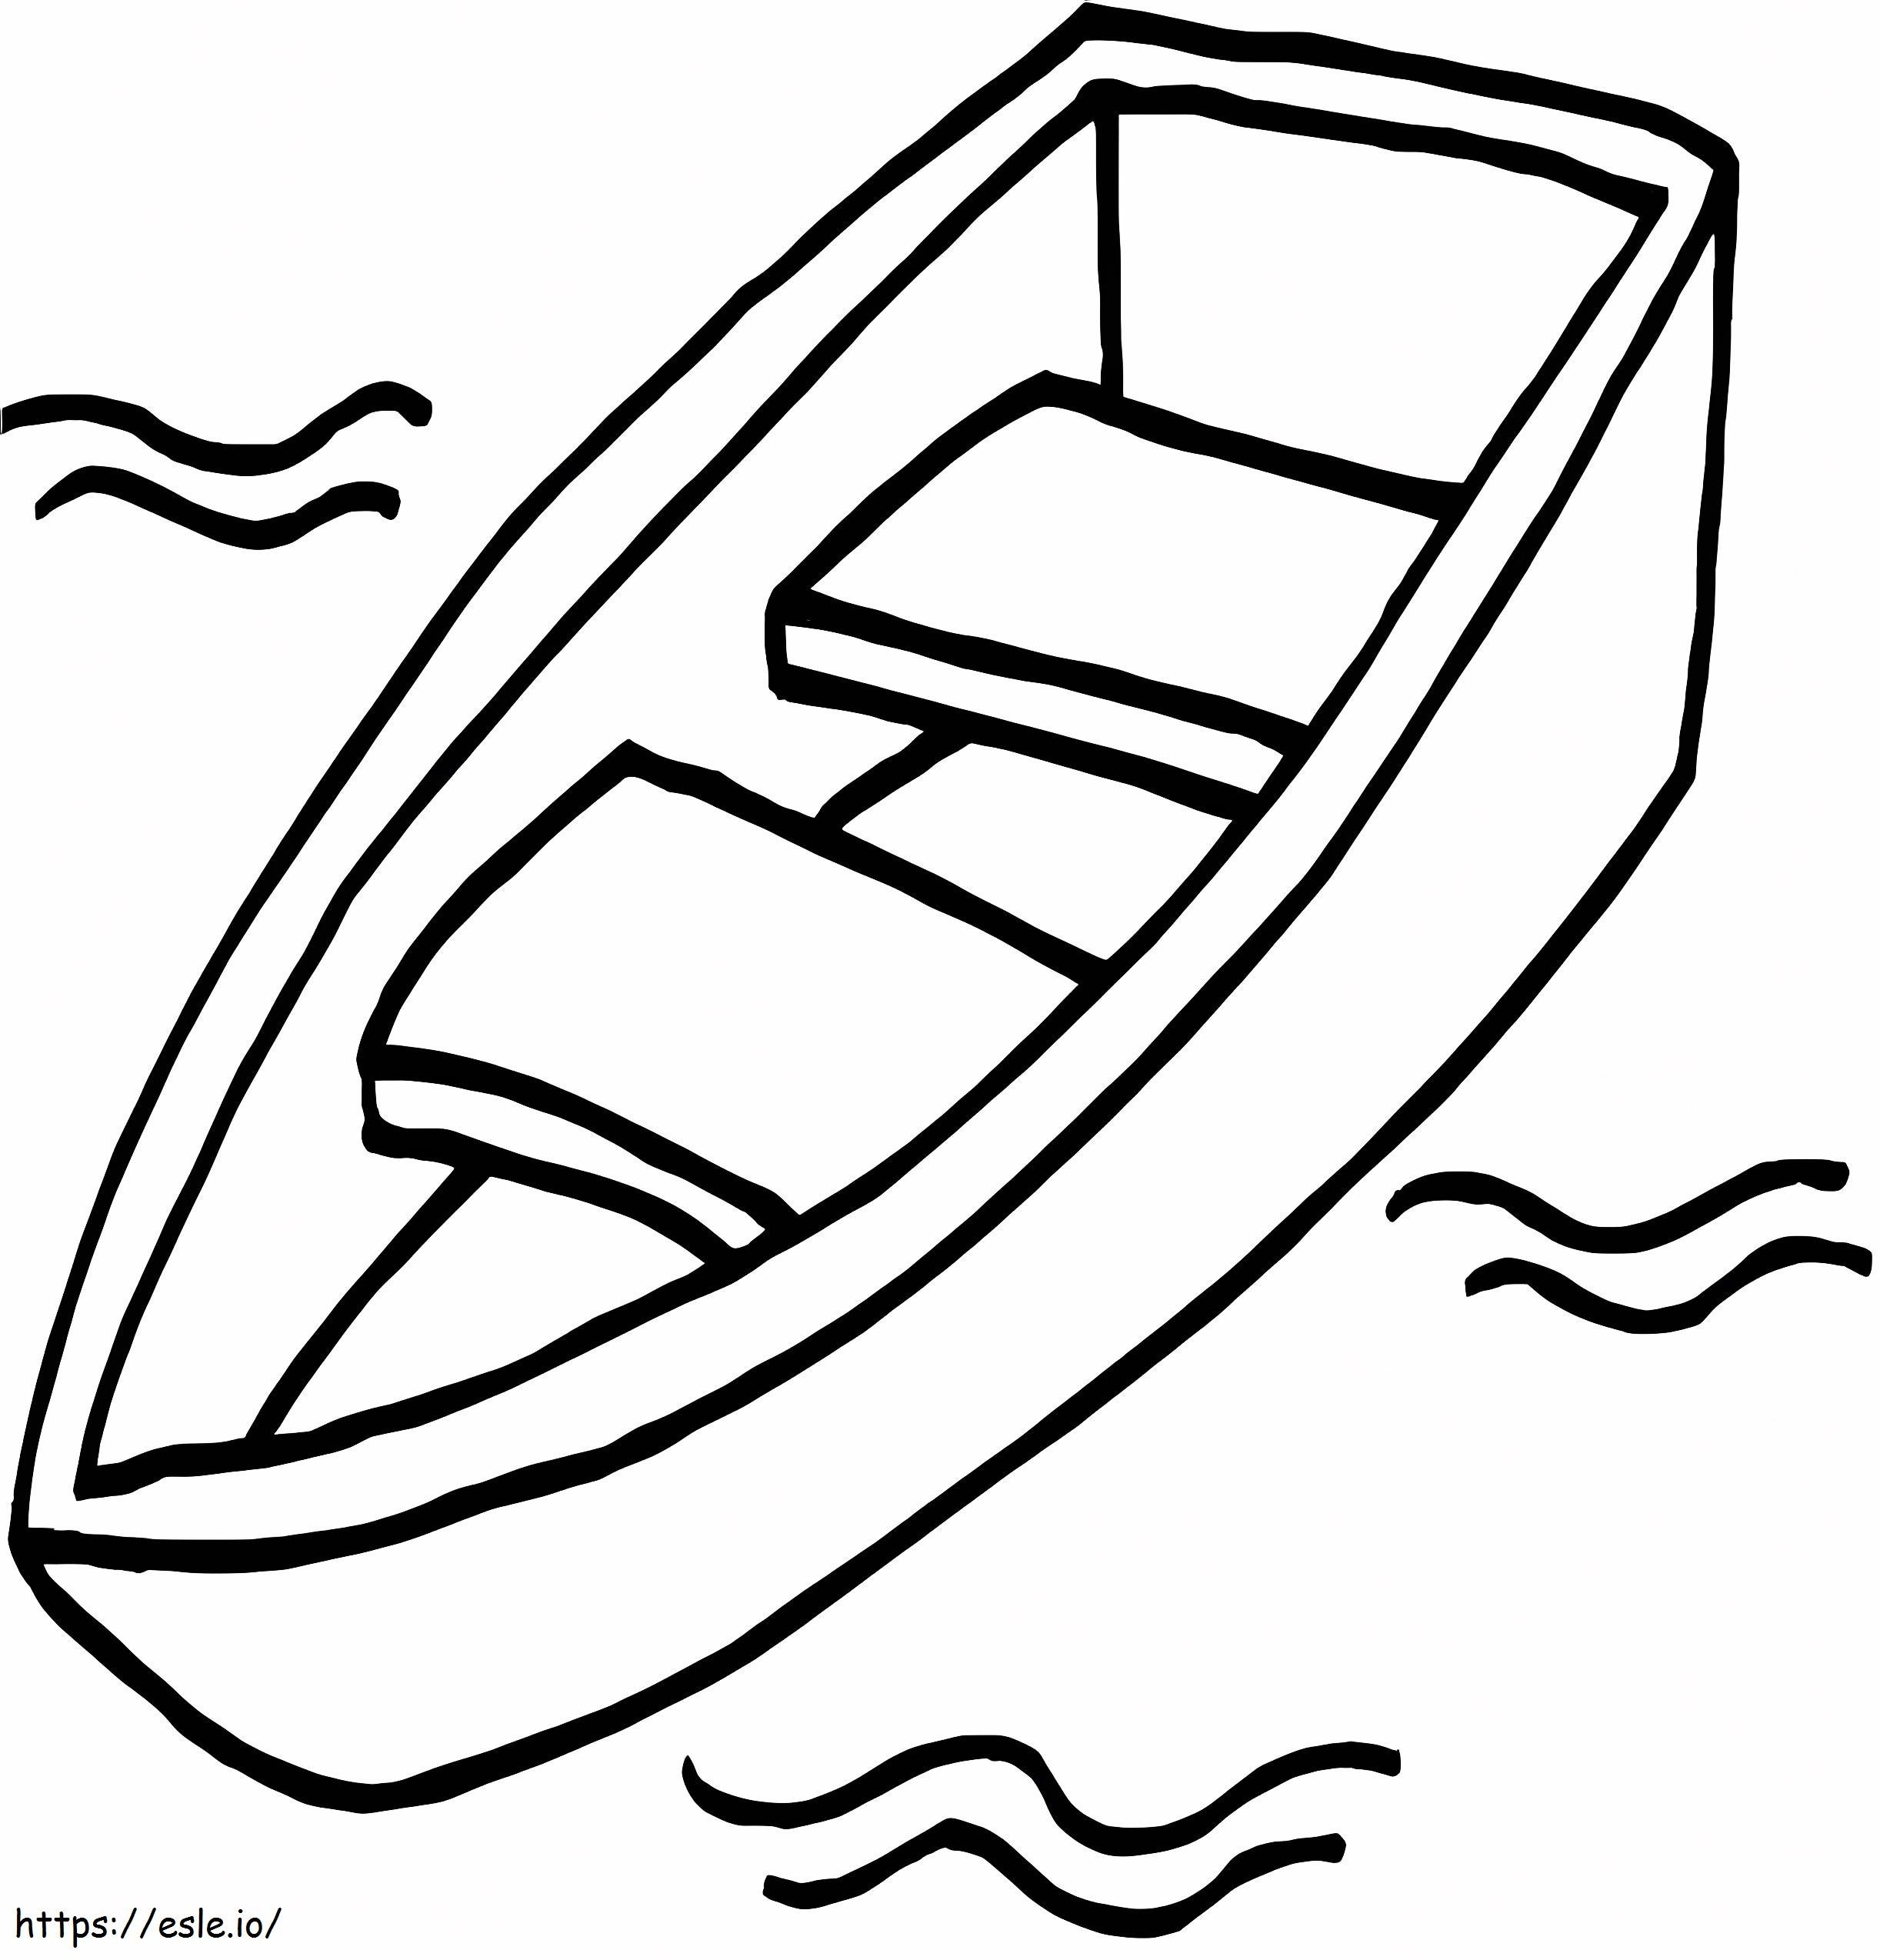 Easy Boat For Kid coloring page